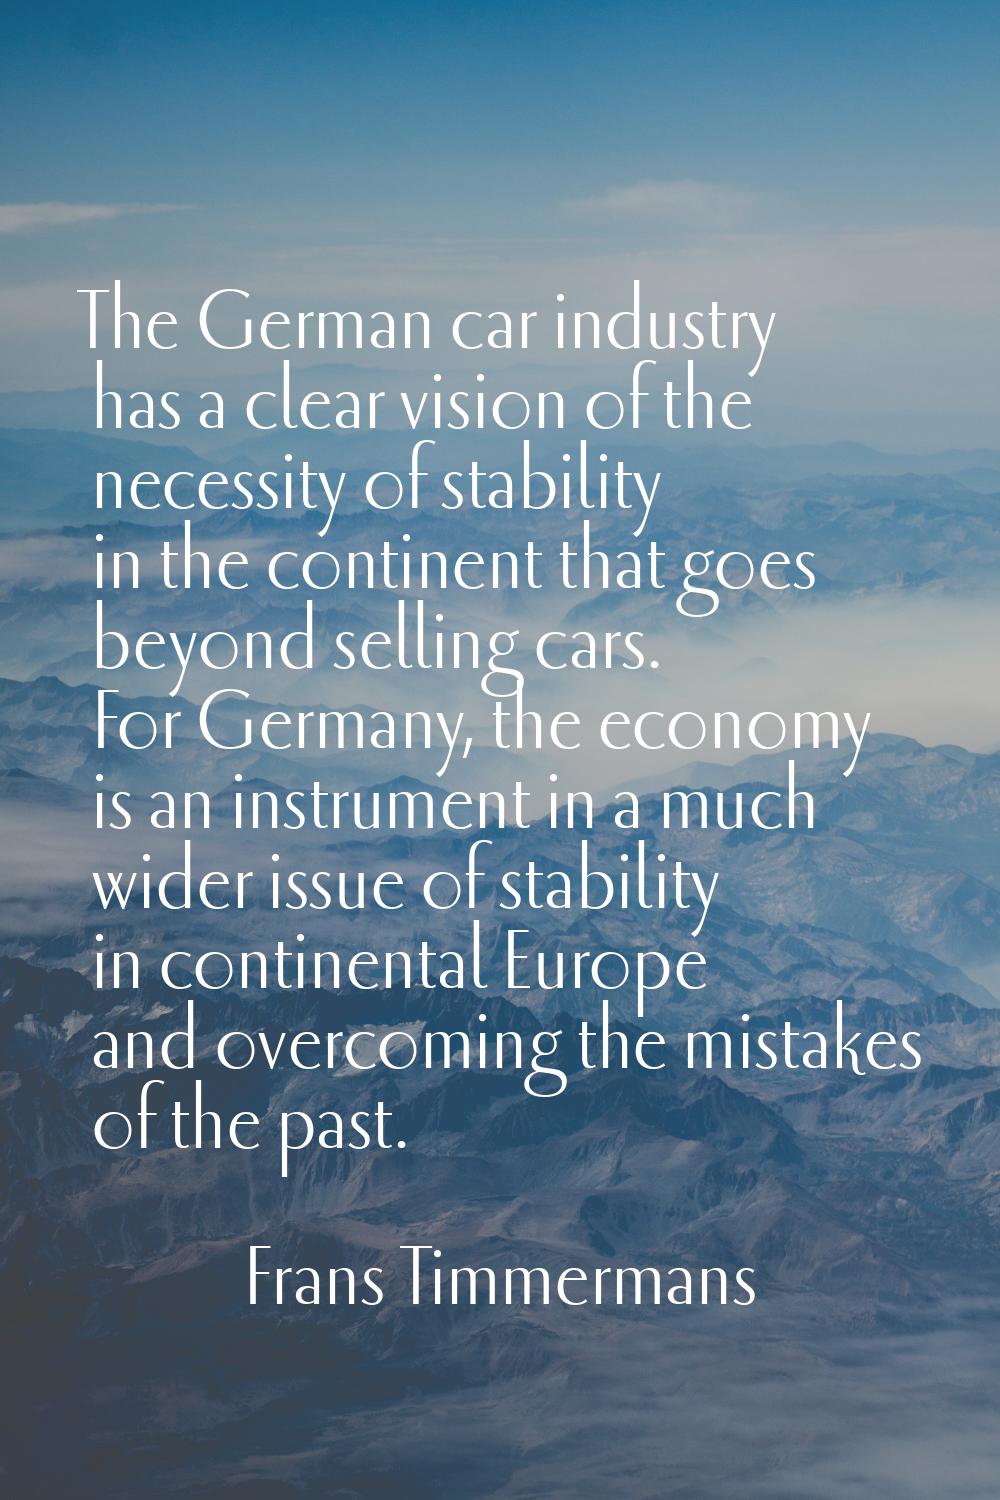 The German car industry has a clear vision of the necessity of stability in the continent that goes